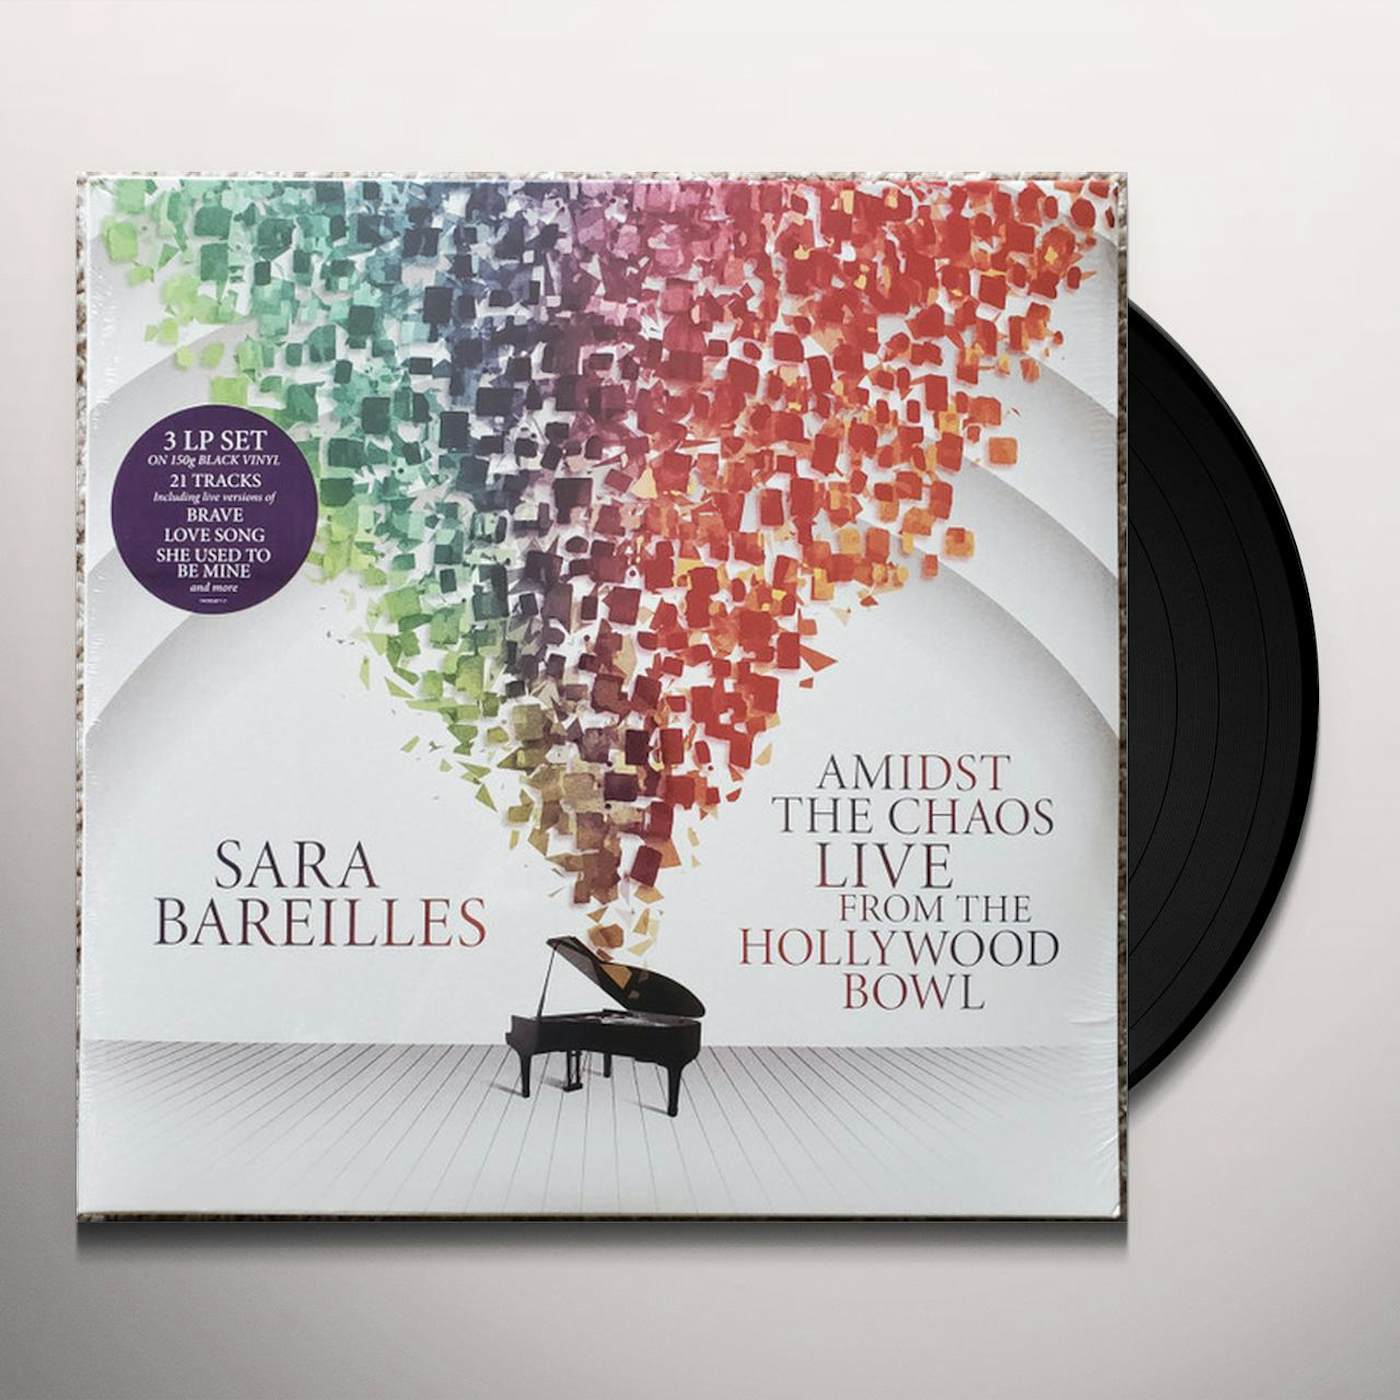 Sara Bareilles AMIDST THE CHAOS: LIVE FROM THE HOLLYWOOD BOWL (3LP/150G) Vinyl Record